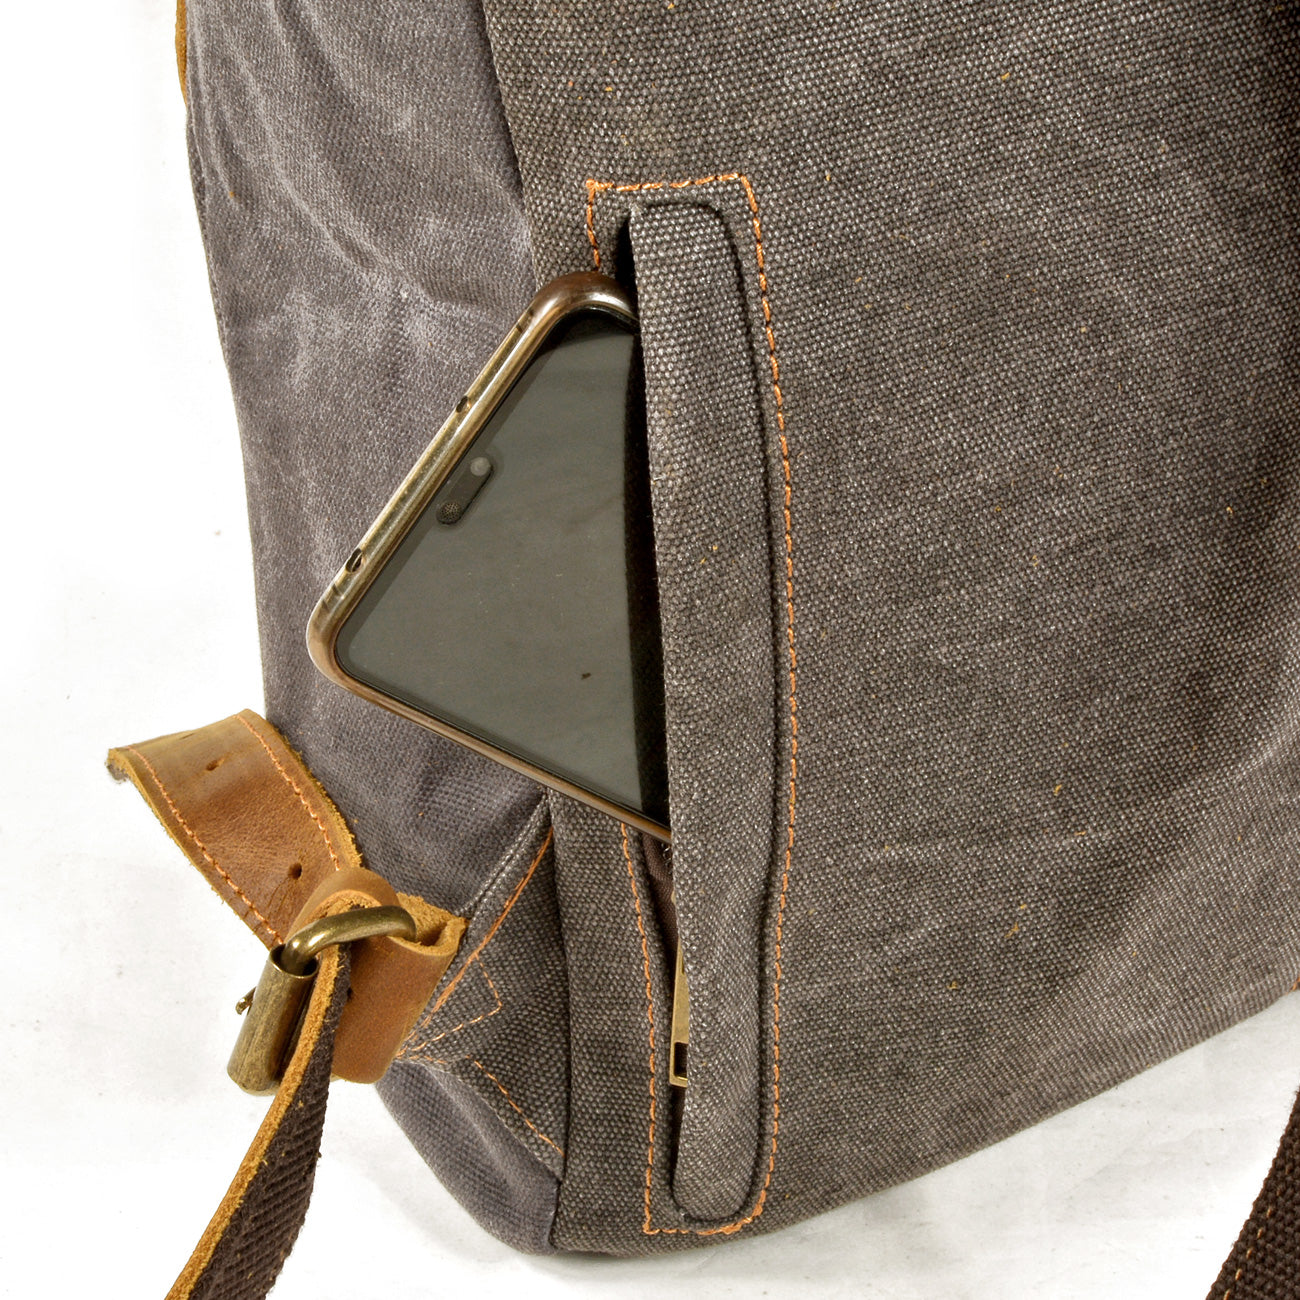 waxed canvas laptop backpack